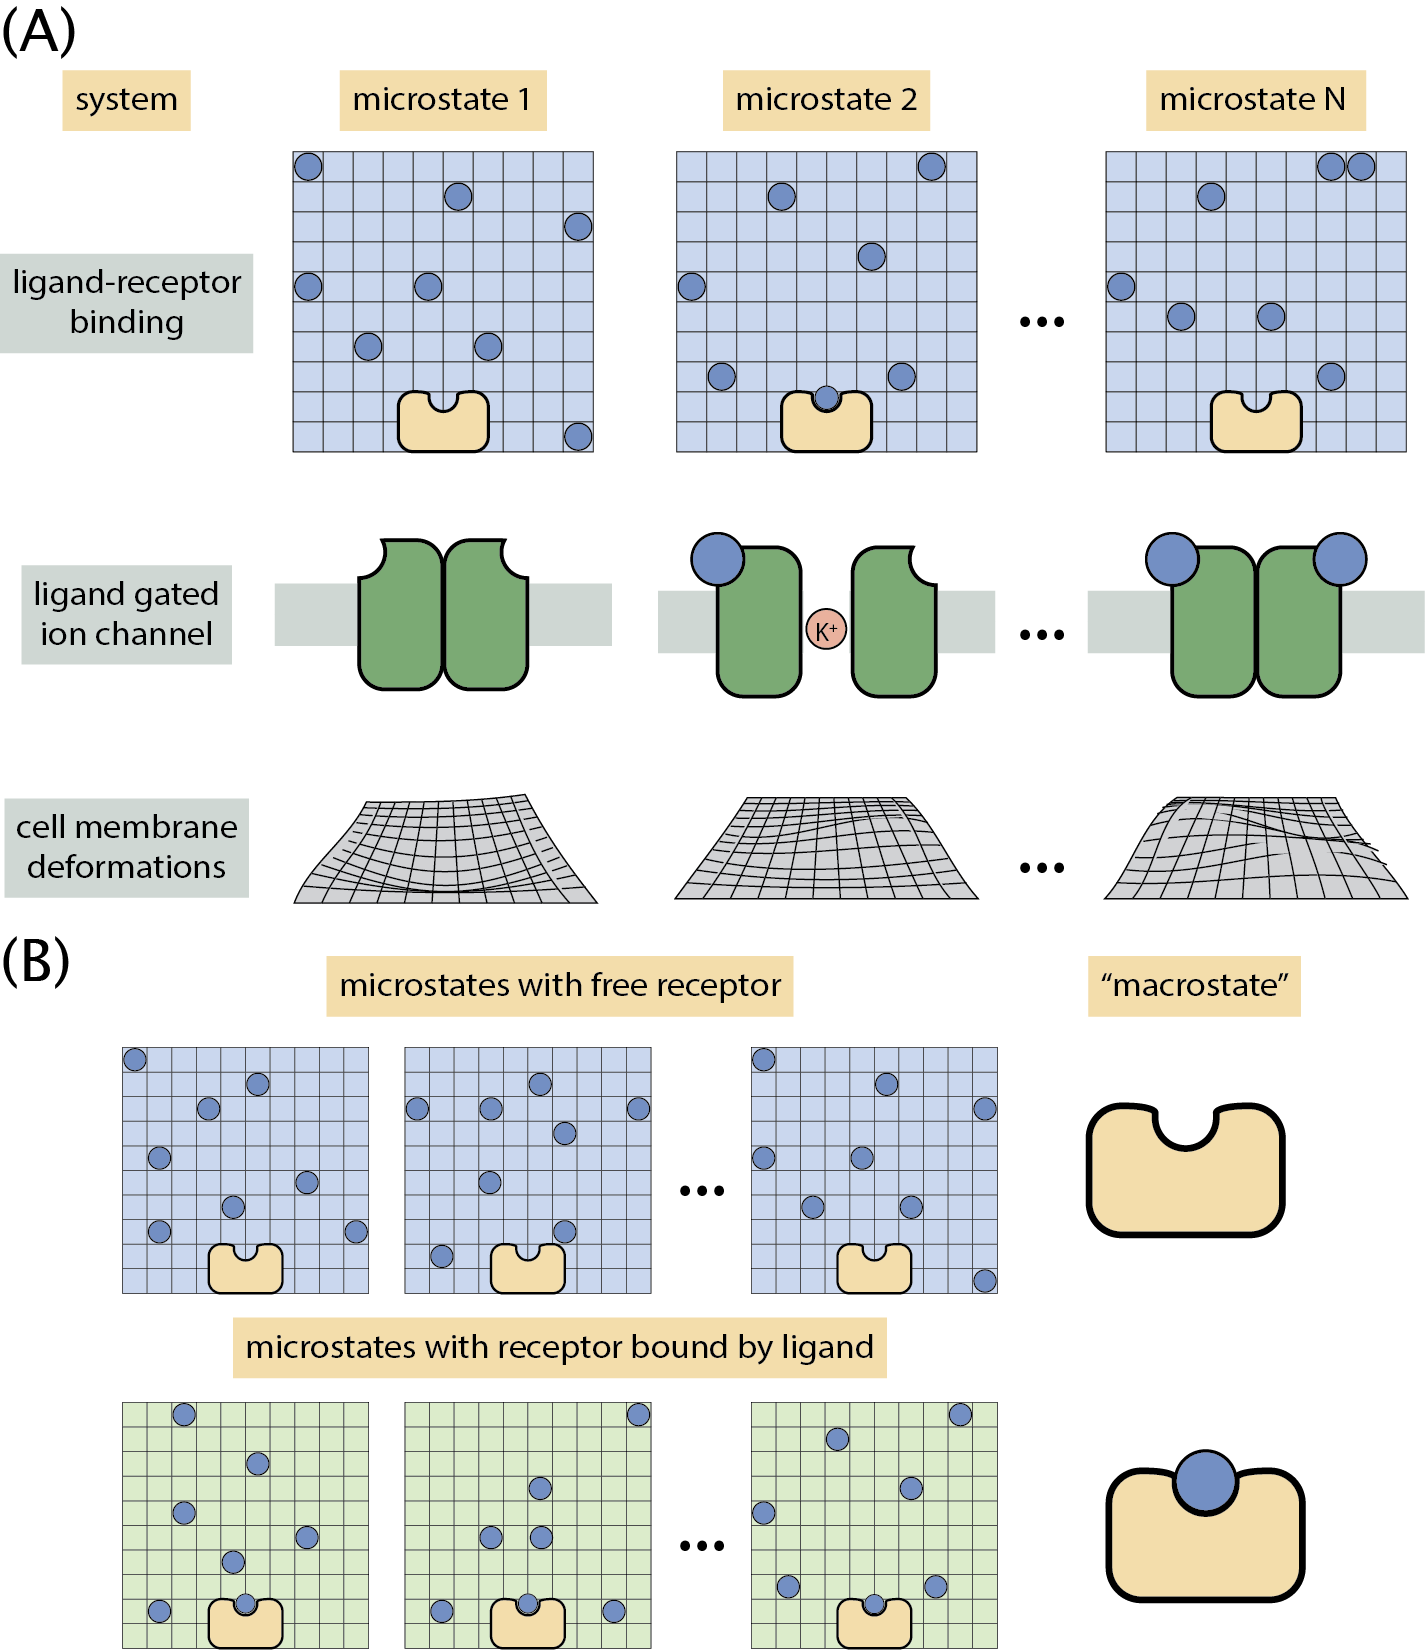 Figure 2: Boltzmann’s law and the definition of a micro- and macrostate. (A) Top panel: ligand-receptor binding microstates. Middle panel: ligand-gated ion channel microstates. Bottom panel: membrane patch deformations. (B) Schematic of the definition of a “macrostate.” In the ligand-receptor binding problem, we ignore all ligand molecules’ spatial configuration and focus on the receptor’s binding state.